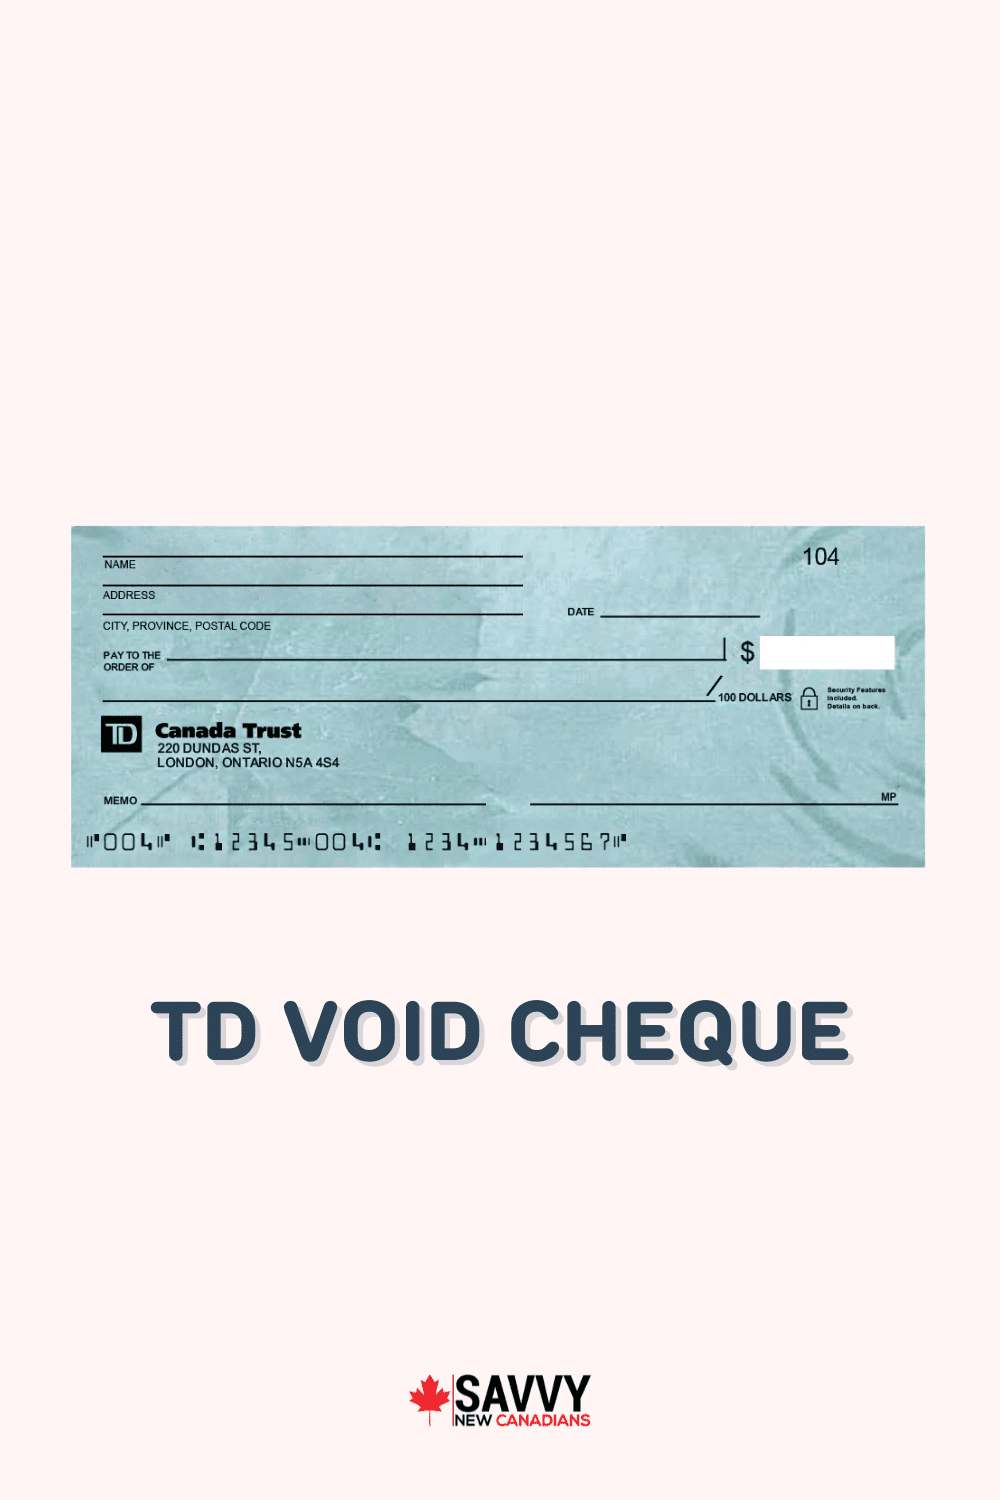 TD Sample Cheque: How To Read and Get a TD Void Cheque in 2022